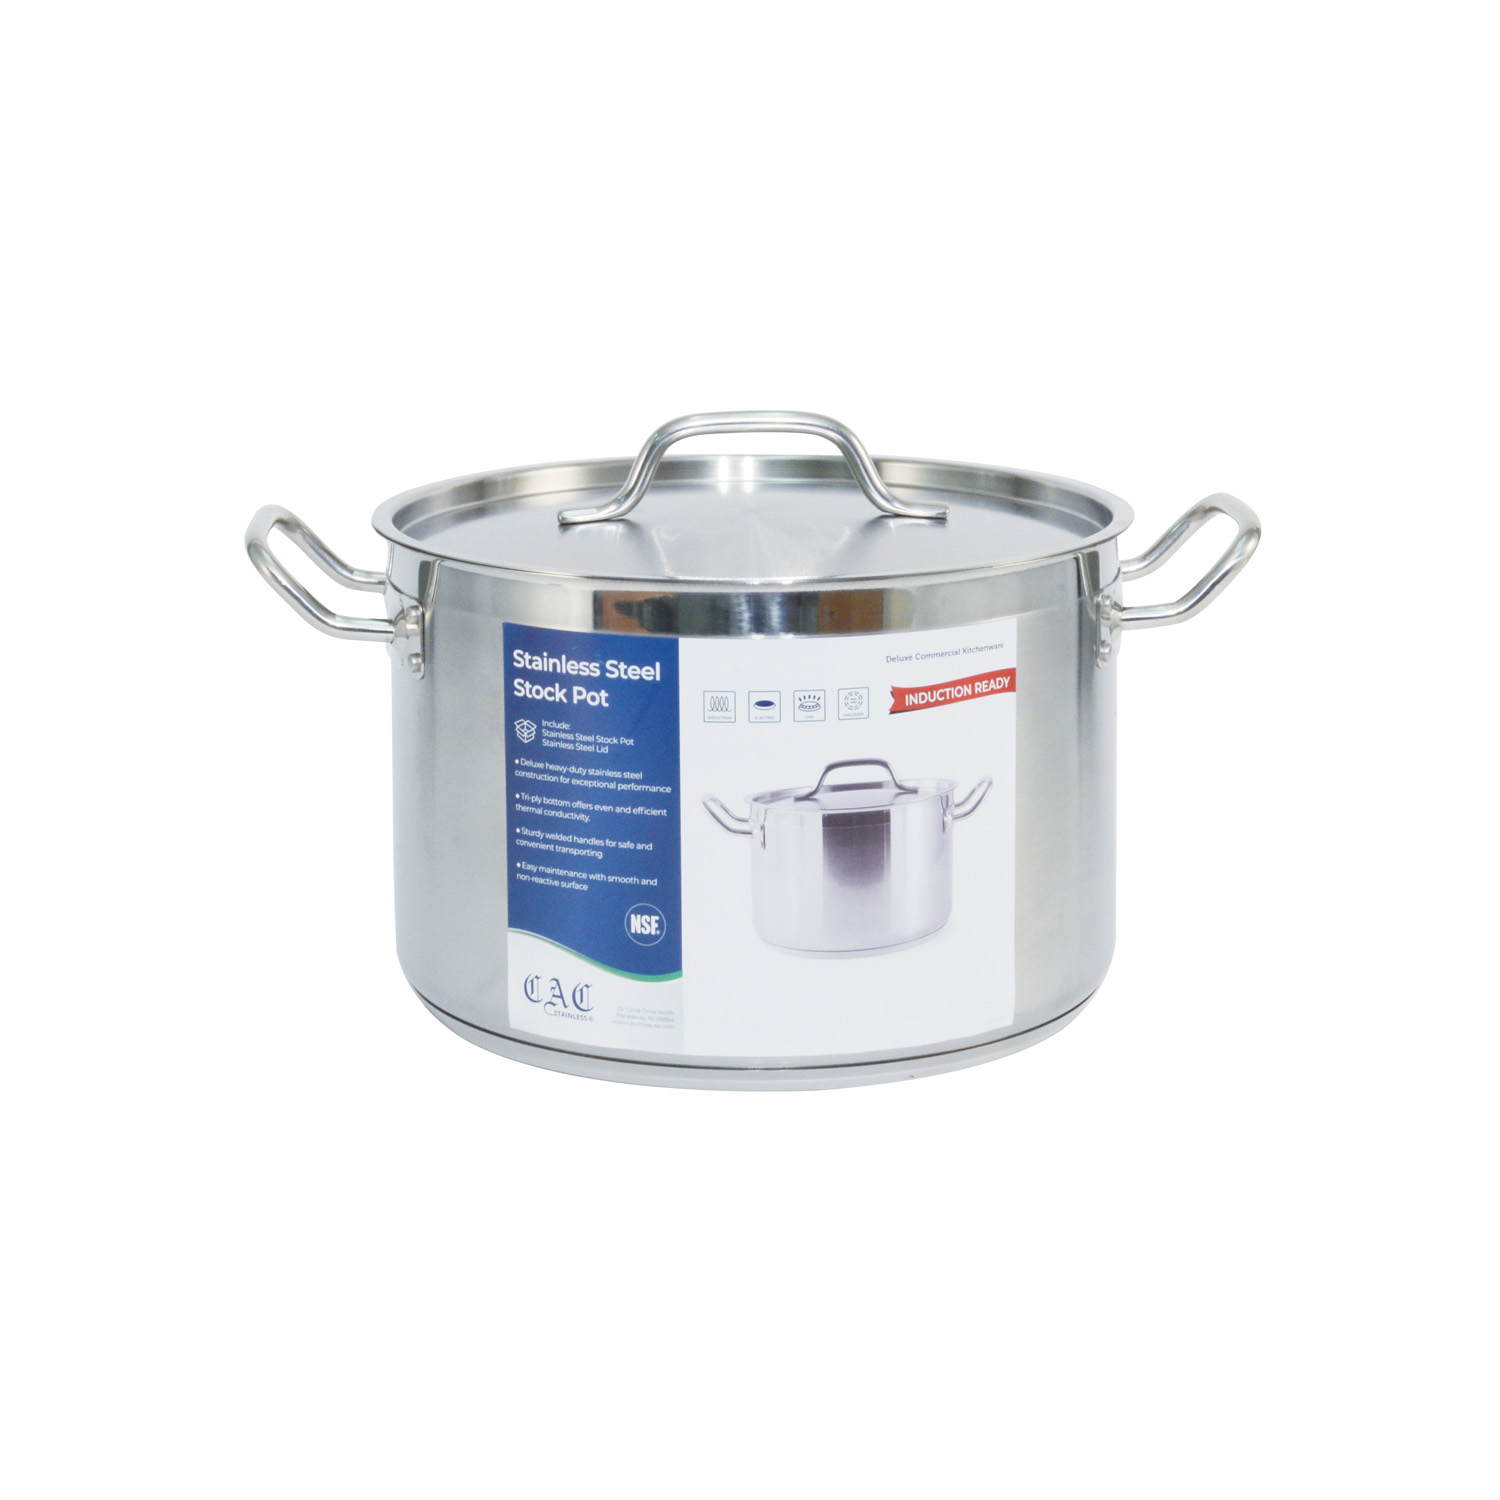 CAC China STKP-12 Stainless Steel Stock Pot with Lid 12 Qt.